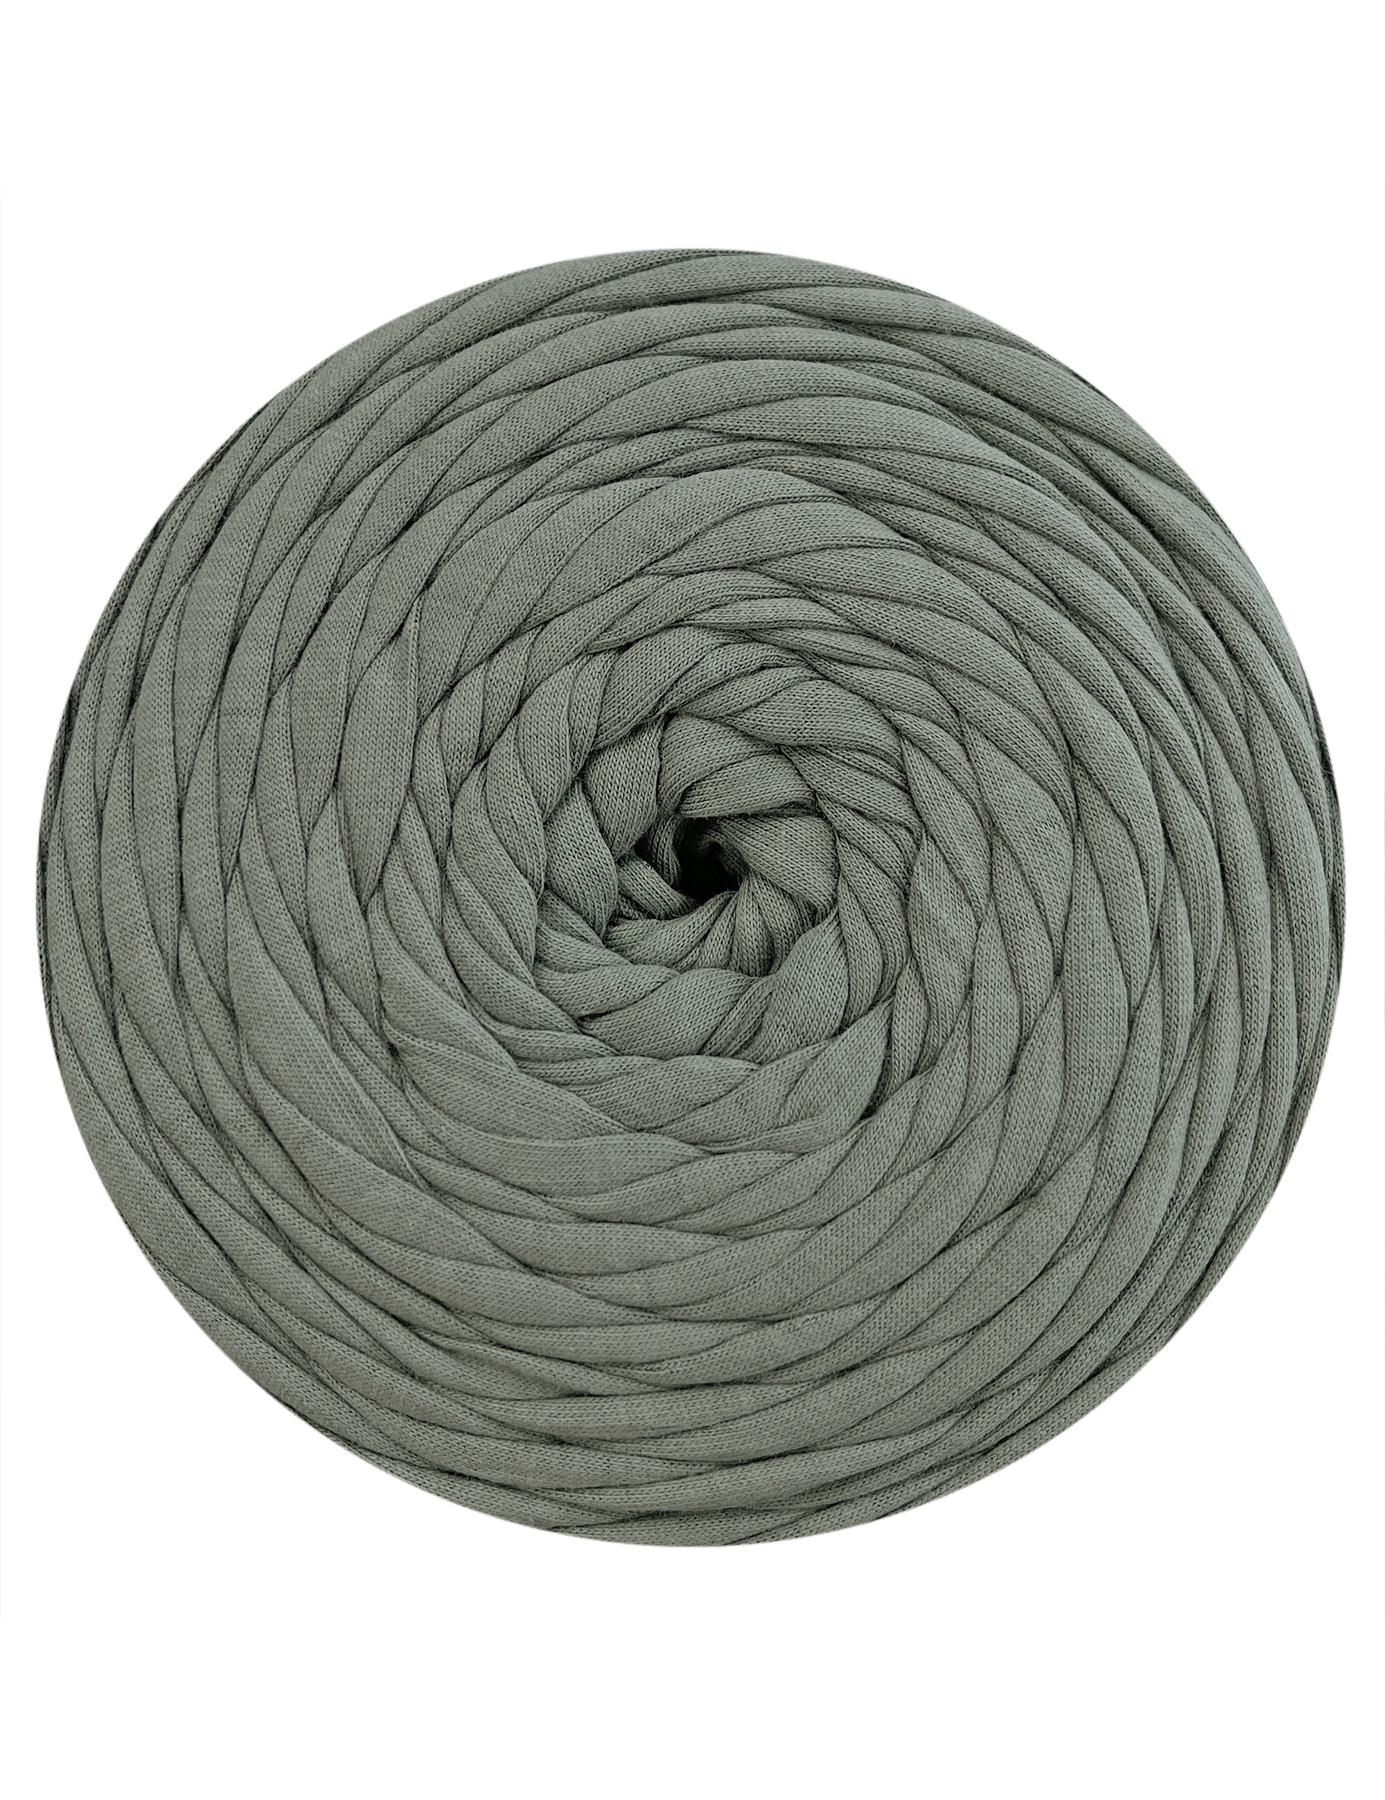 Muted sage green t-shirt yarn by Hoooked Zpagetti (100-120m)